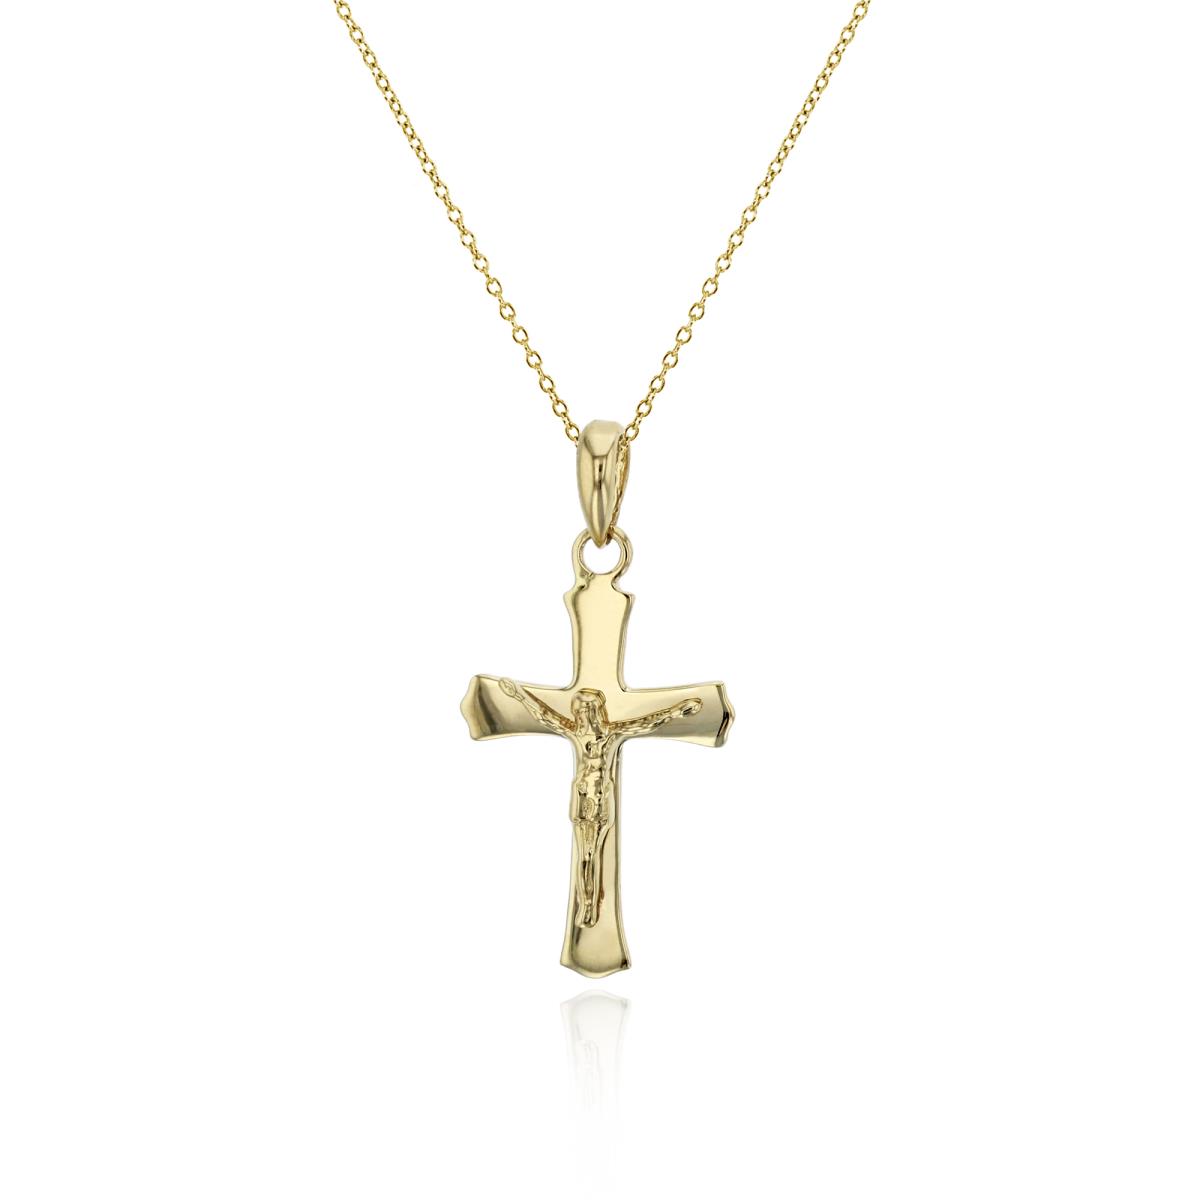 10K Yellow Gold 25x12mm Polished Crucifix Cross 18" Necklace